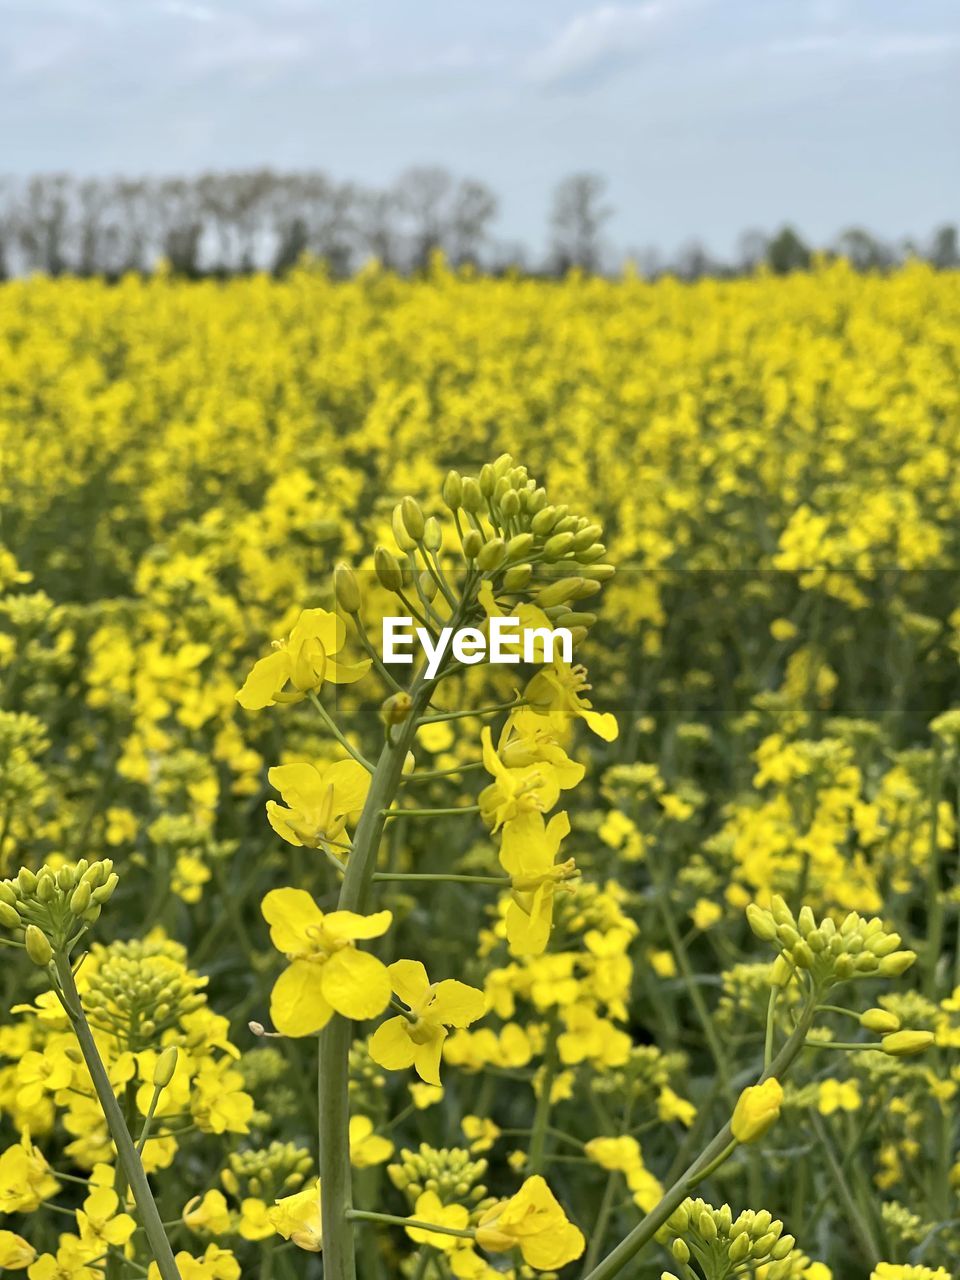 rapeseed, yellow, plant, flower, produce, vegetable, flowering plant, canola, beauty in nature, growth, oilseed rape, field, agriculture, food, freshness, landscape, land, rural scene, crop, mustard, brassica rapa, nature, farm, environment, blossom, fragility, abundance, springtime, no people, scenics - nature, sky, day, focus on foreground, tranquility, outdoors, vibrant color, prairie, cultivated, tranquil scene, close-up, cultivated land, meadow, cloud, flower head, idyllic